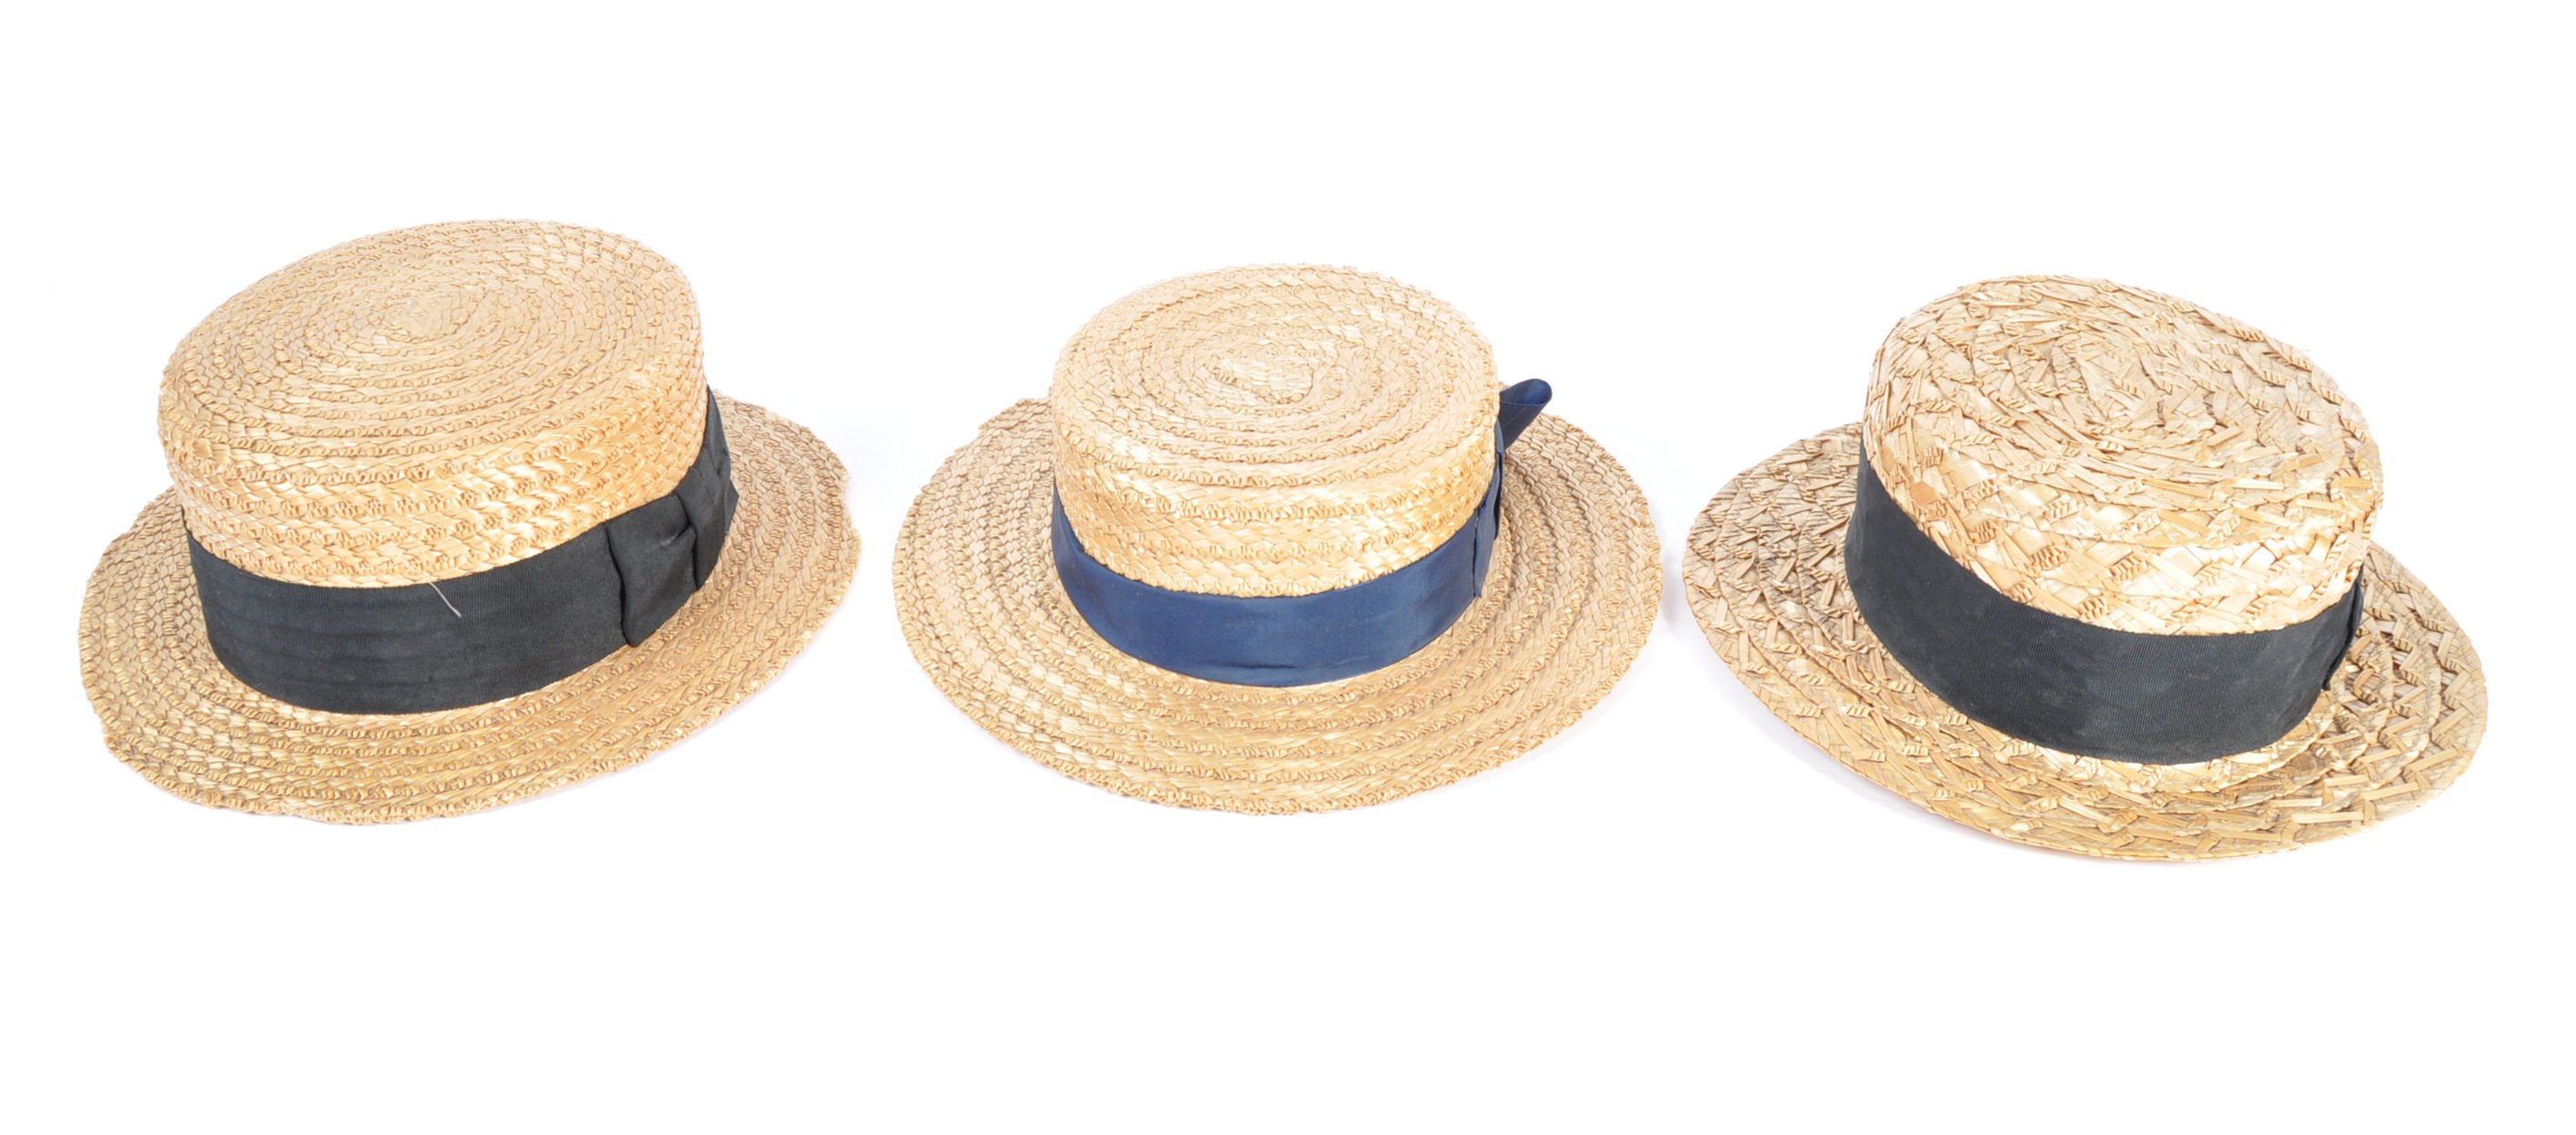 UNIFORMS AND FANCY DRESS - A COLLECTION OF EDWARDIAN STYLE STRAW BOATER HATS.